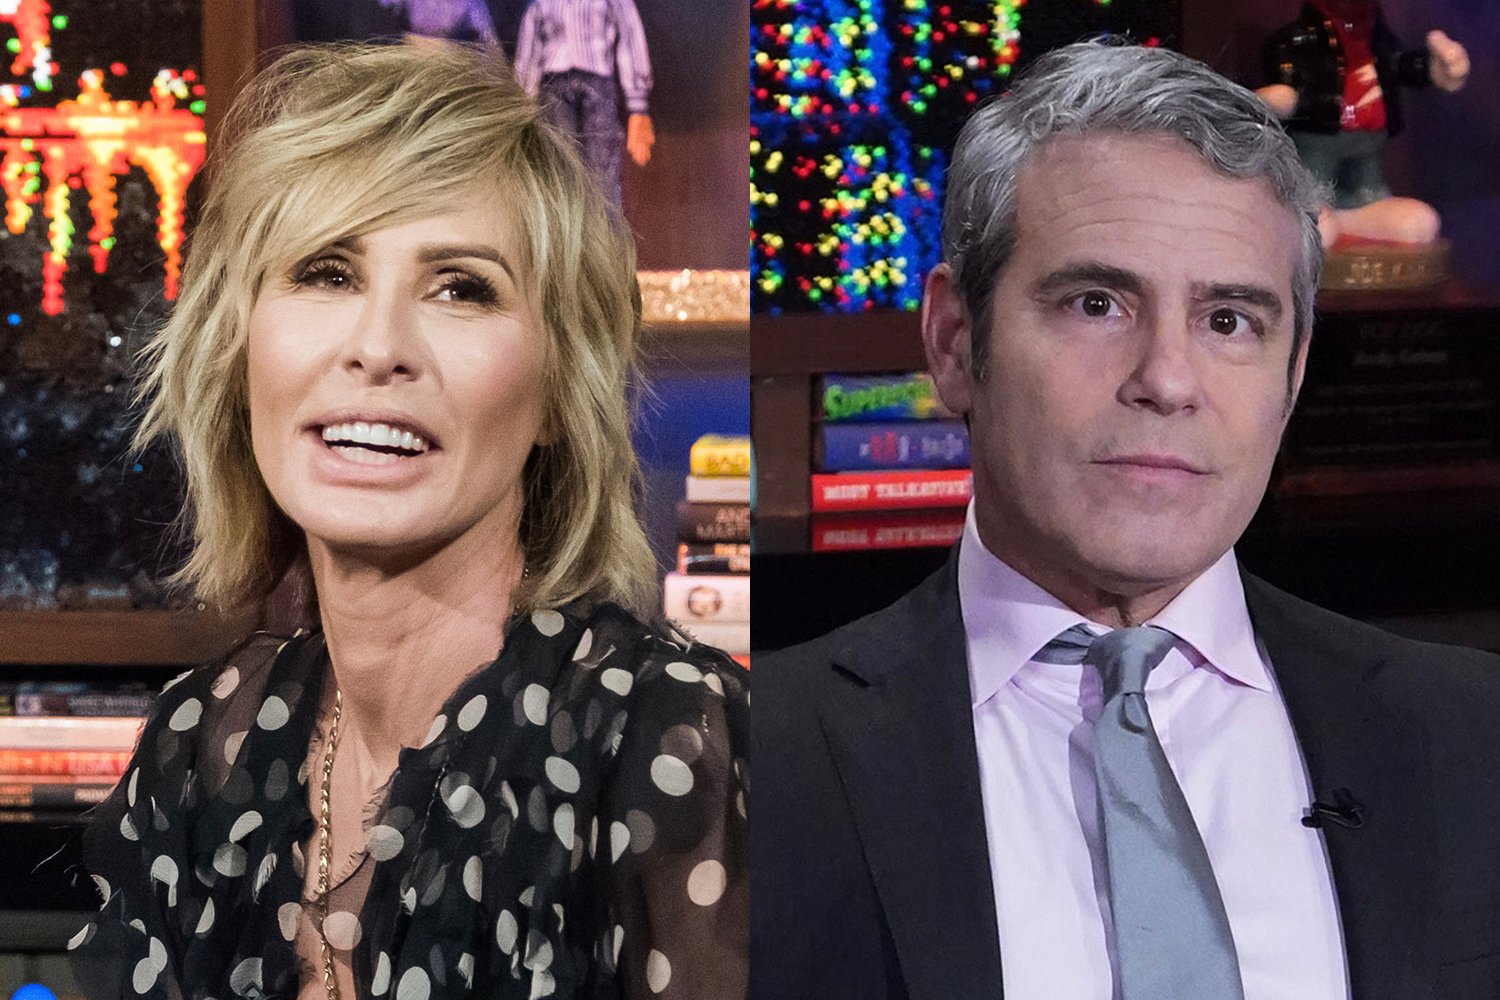 ‘RHONY’ Alum Carole Radziwill Fires Back at Andy Cohen After Claims He ‘Changed Her Life’